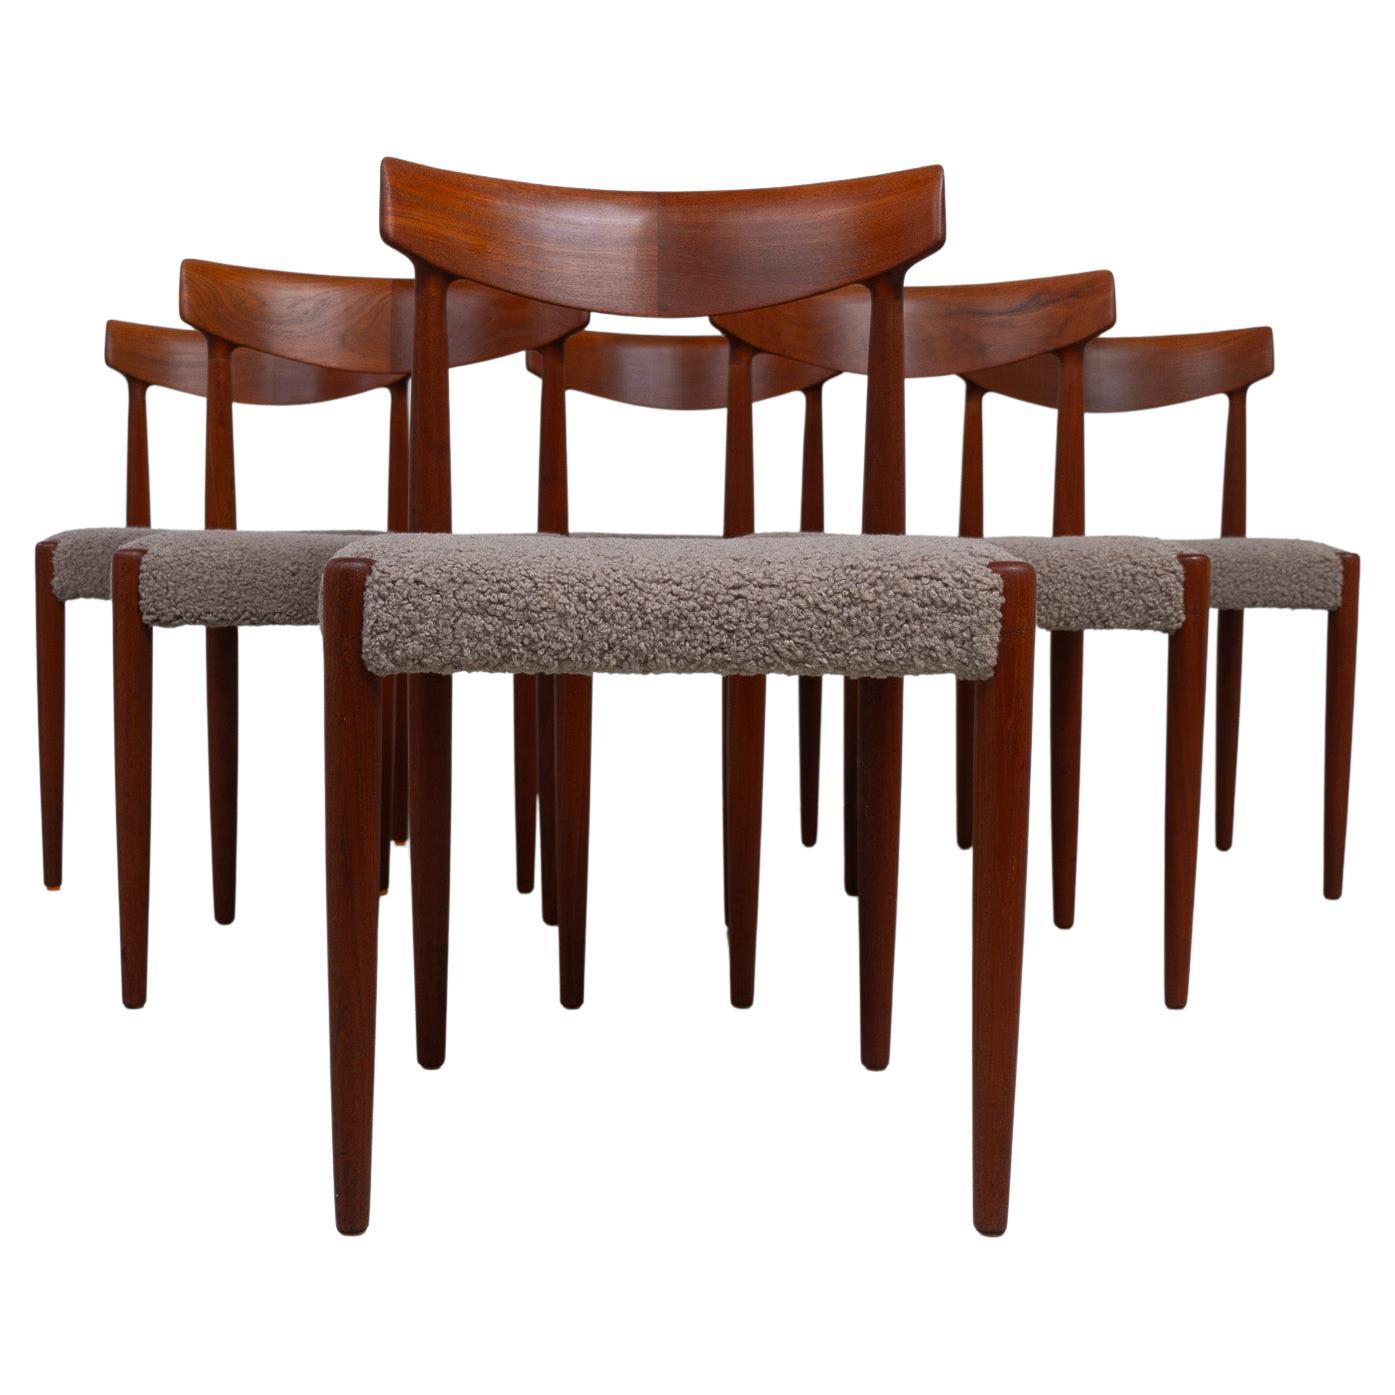 Danish Modern Teak Dining Chairs by Knud Færch for Slagelse, 1960s. Set of 6.
Set of six stunning dining room chairs model 343 designed by Danish architect Knud Færch and manufactured by Slagelse Møbelværk, Denmark in the 1960s.
Beautifully sculpted